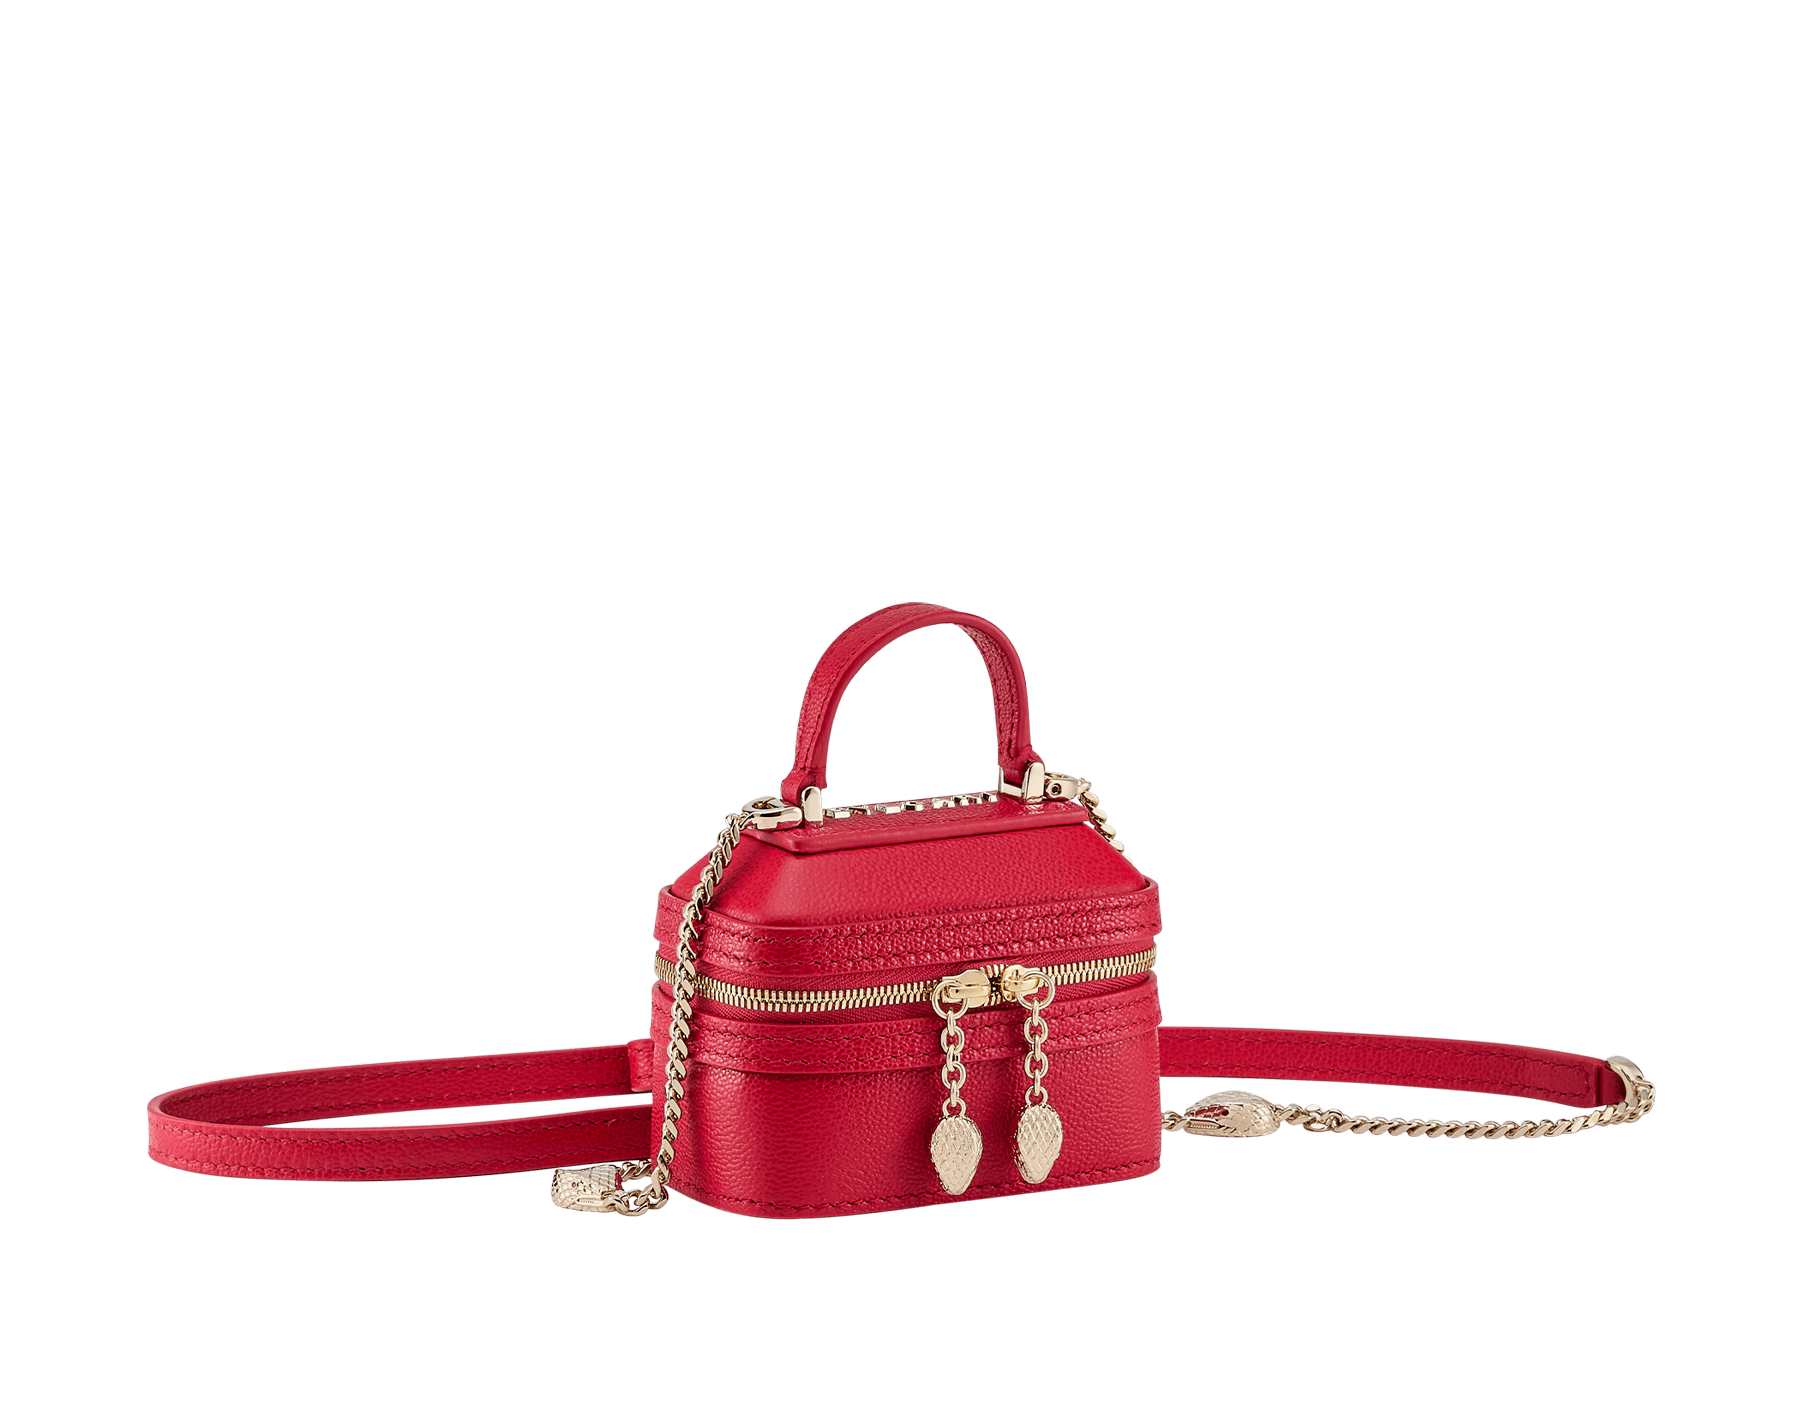 Serpenti Forever mini jewelry box bag in grained, amaranth garnet red Urban calf leather. Captivating snakehead zip pulls and light gold-plated brass chain embellishment. SEA-NANOJWLRYBOX image 1